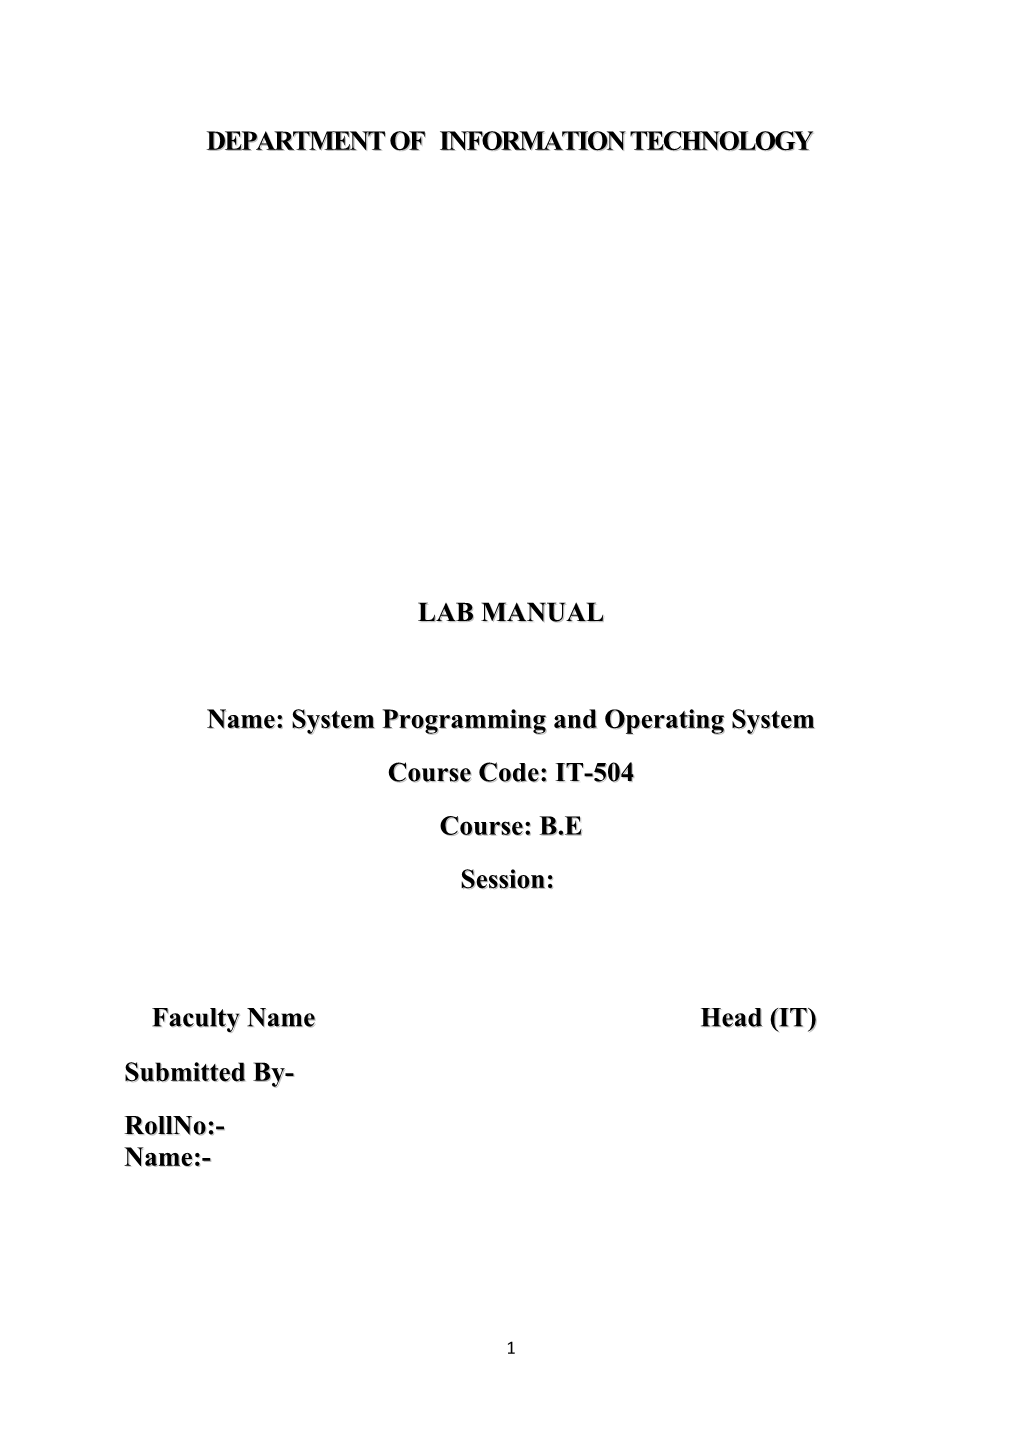 Name:System Programming and Operating System